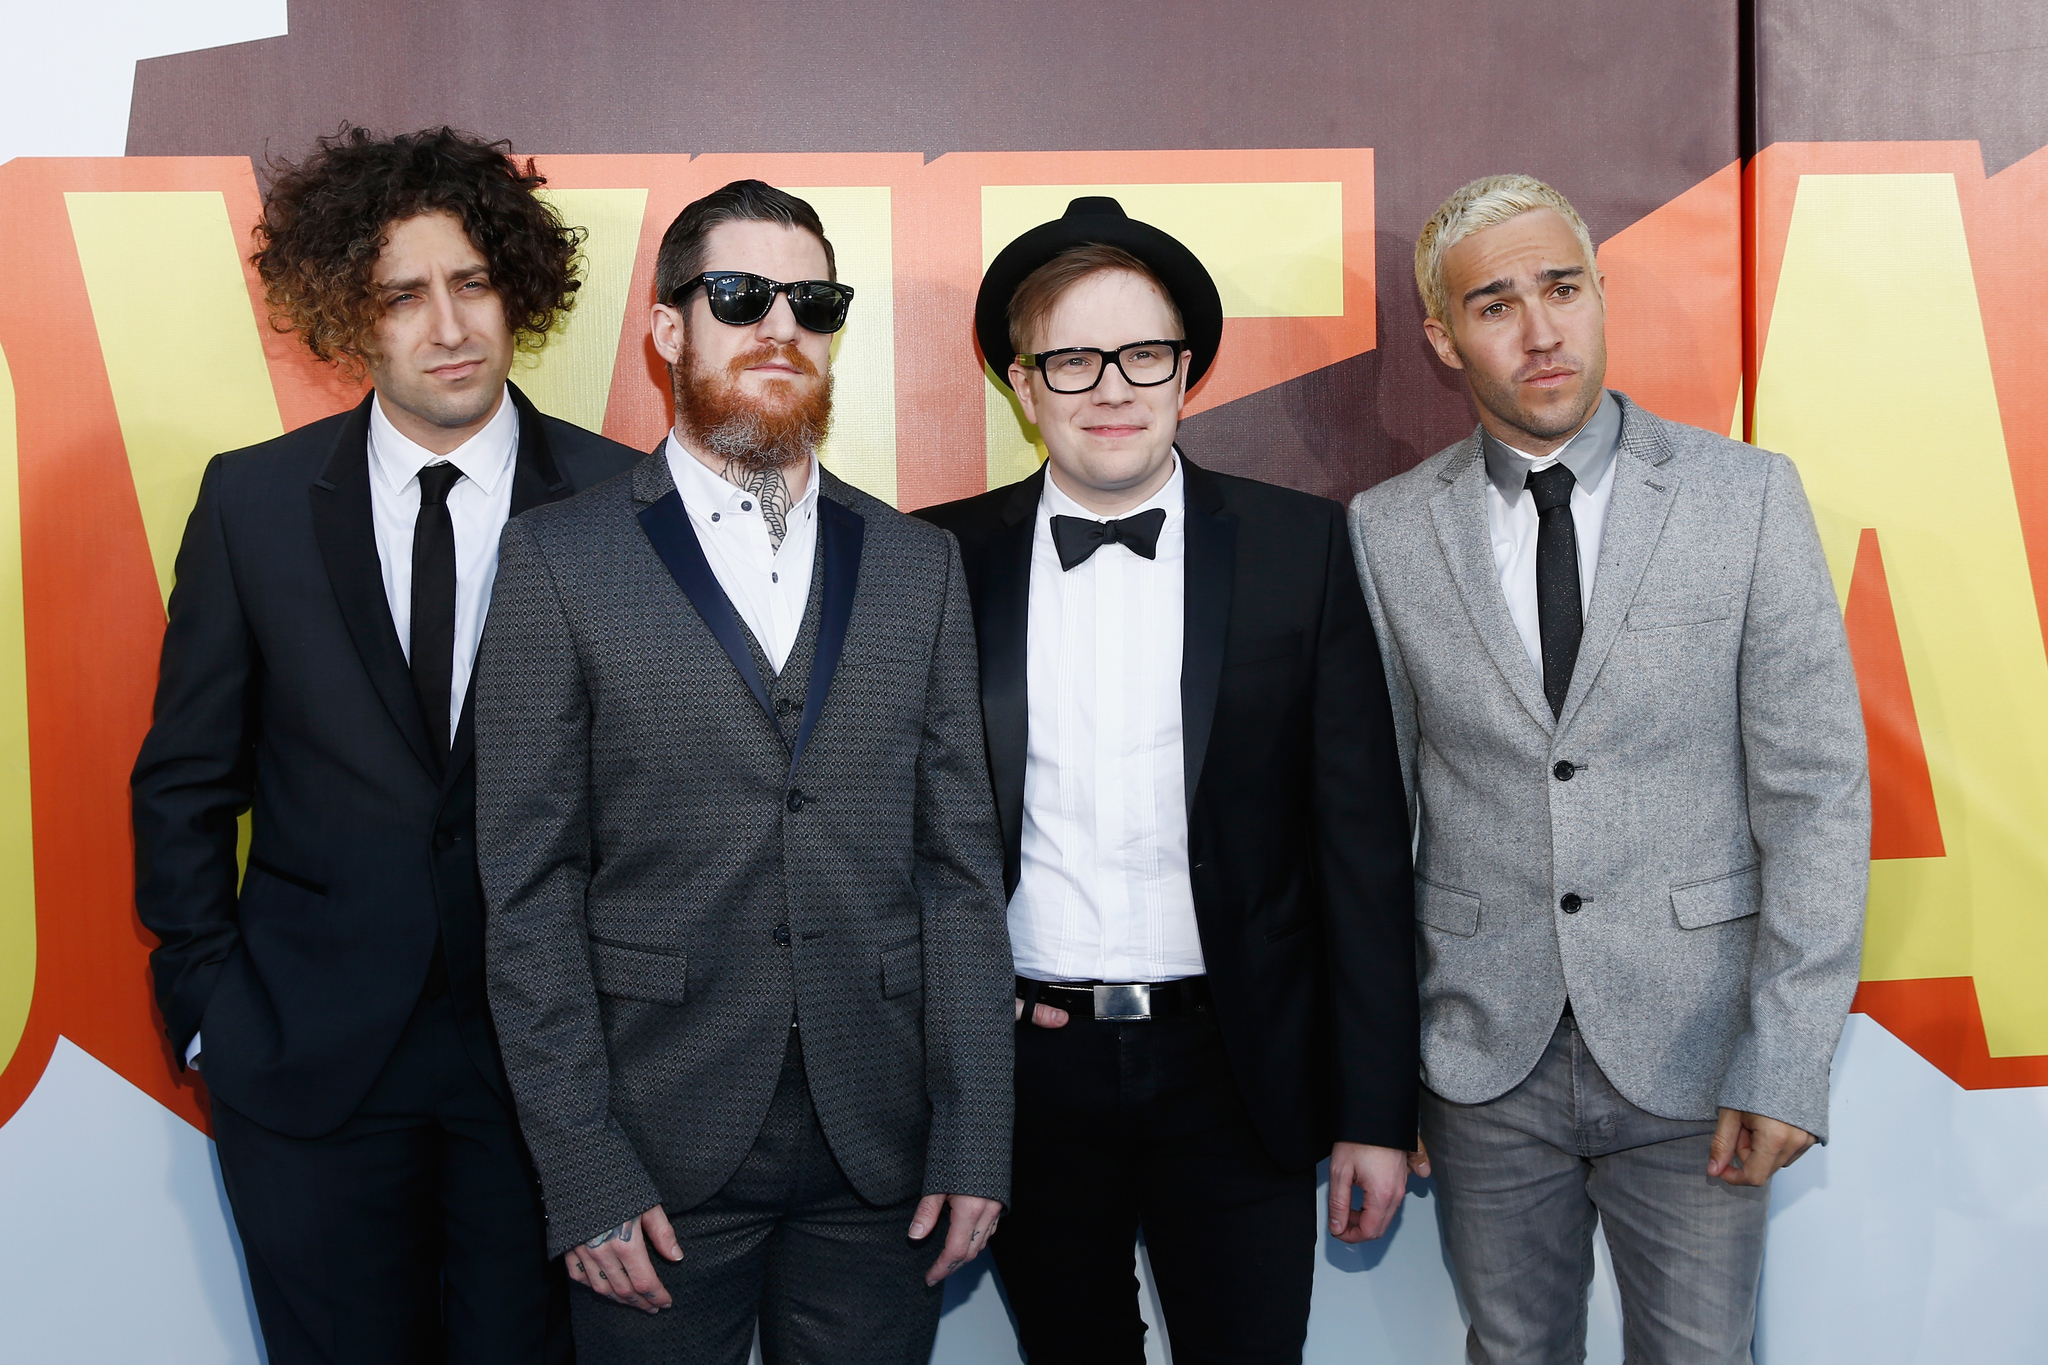 Fall Out Boy and Pete Wentz